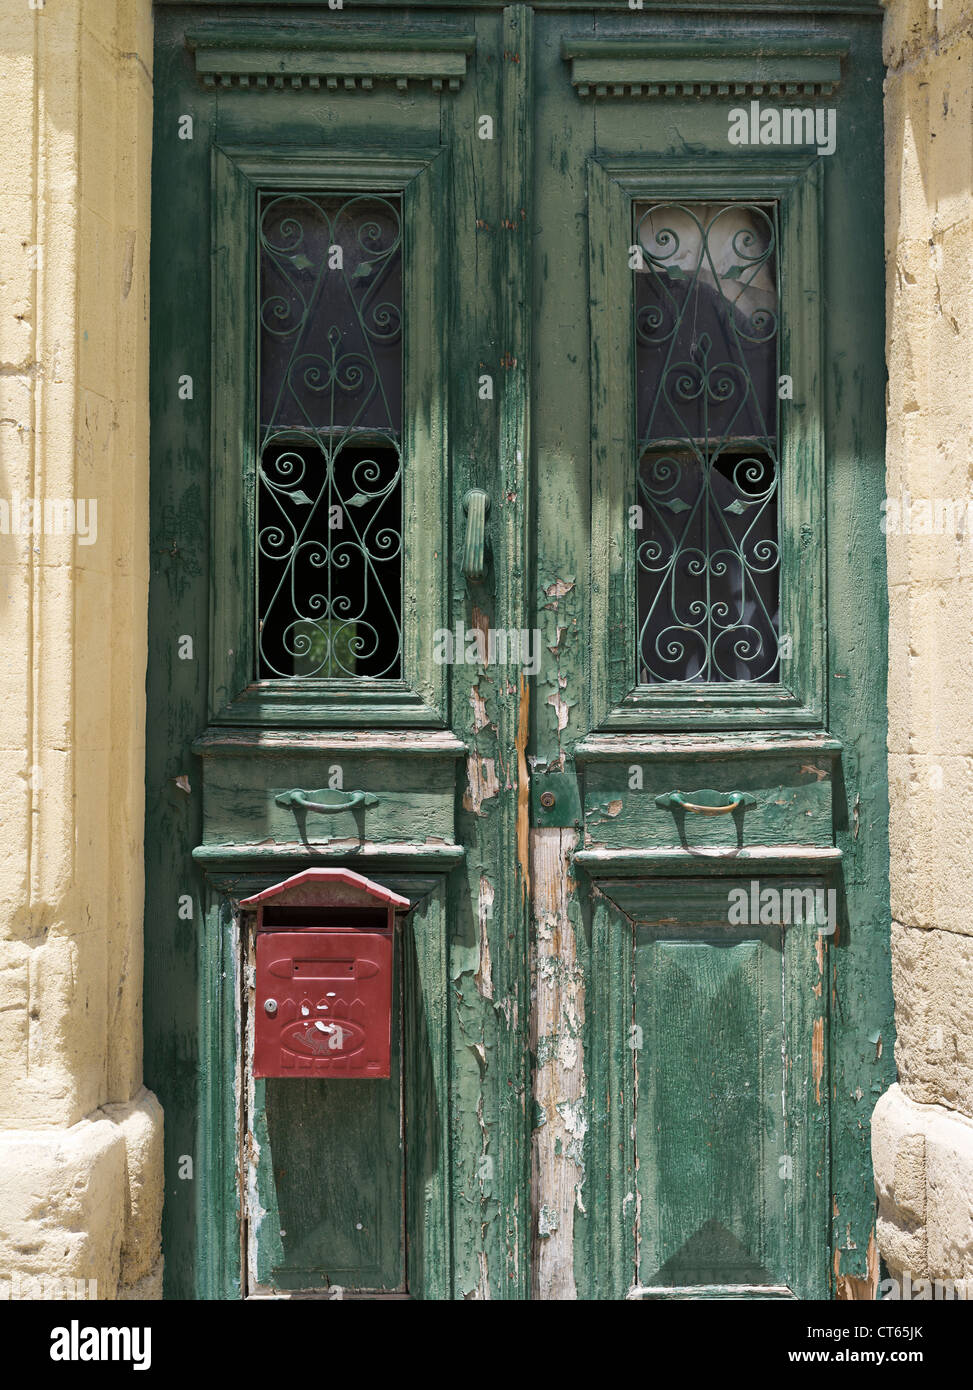 dh Old town Lefkosia NICOSIA SOUTH CYPRUS Cypriot house door with mailbox greece letter box front doorway letterbox Stock Photo